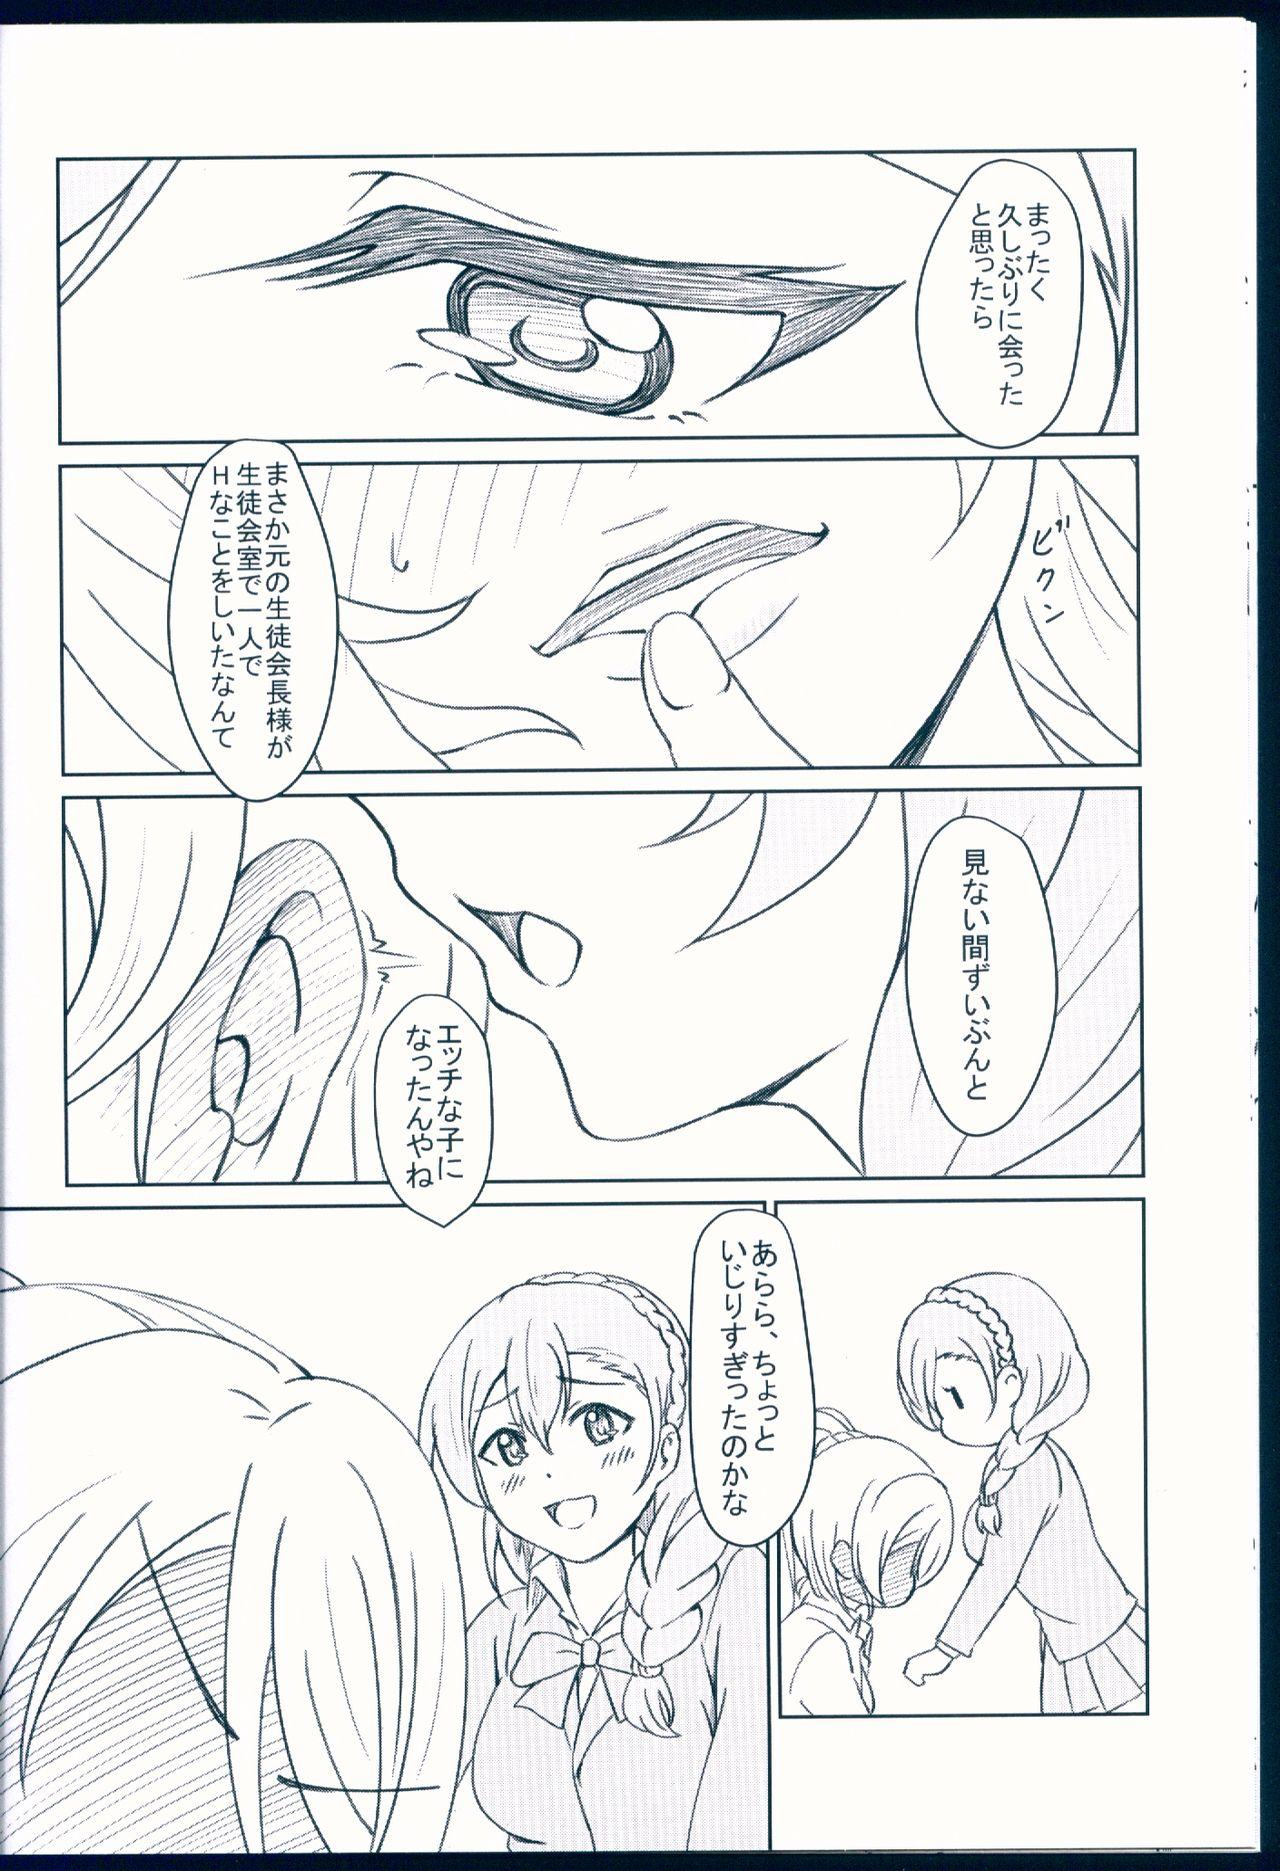 Behind NOZOERI REUNION - Love live Pussysex - Page 12